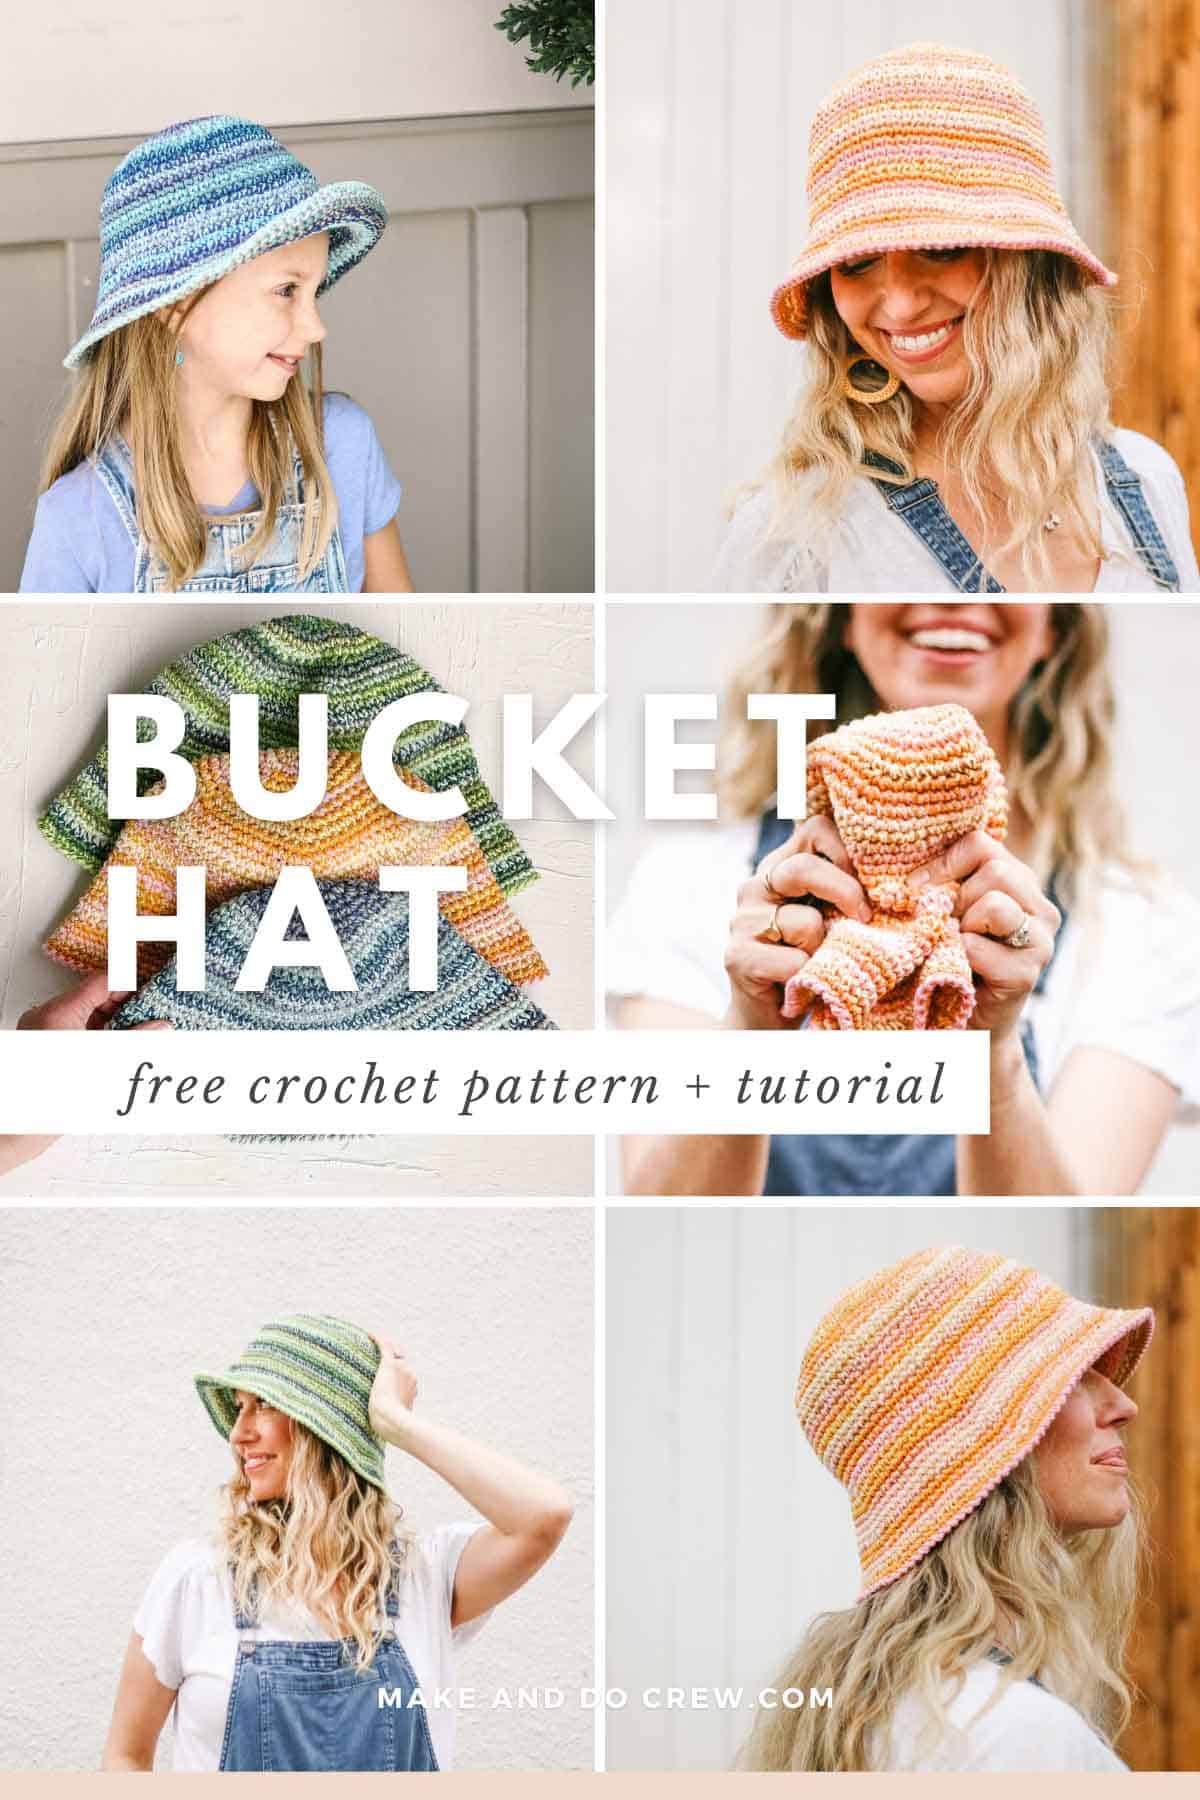 This image shows six different photos of a crochet bucket hat. There is a woman with blond hair wearing a pink crochet bucket hat, a woman with blond hair wearing a green crochet bucket hat, and a child wearing a blue crochet bucket hat.